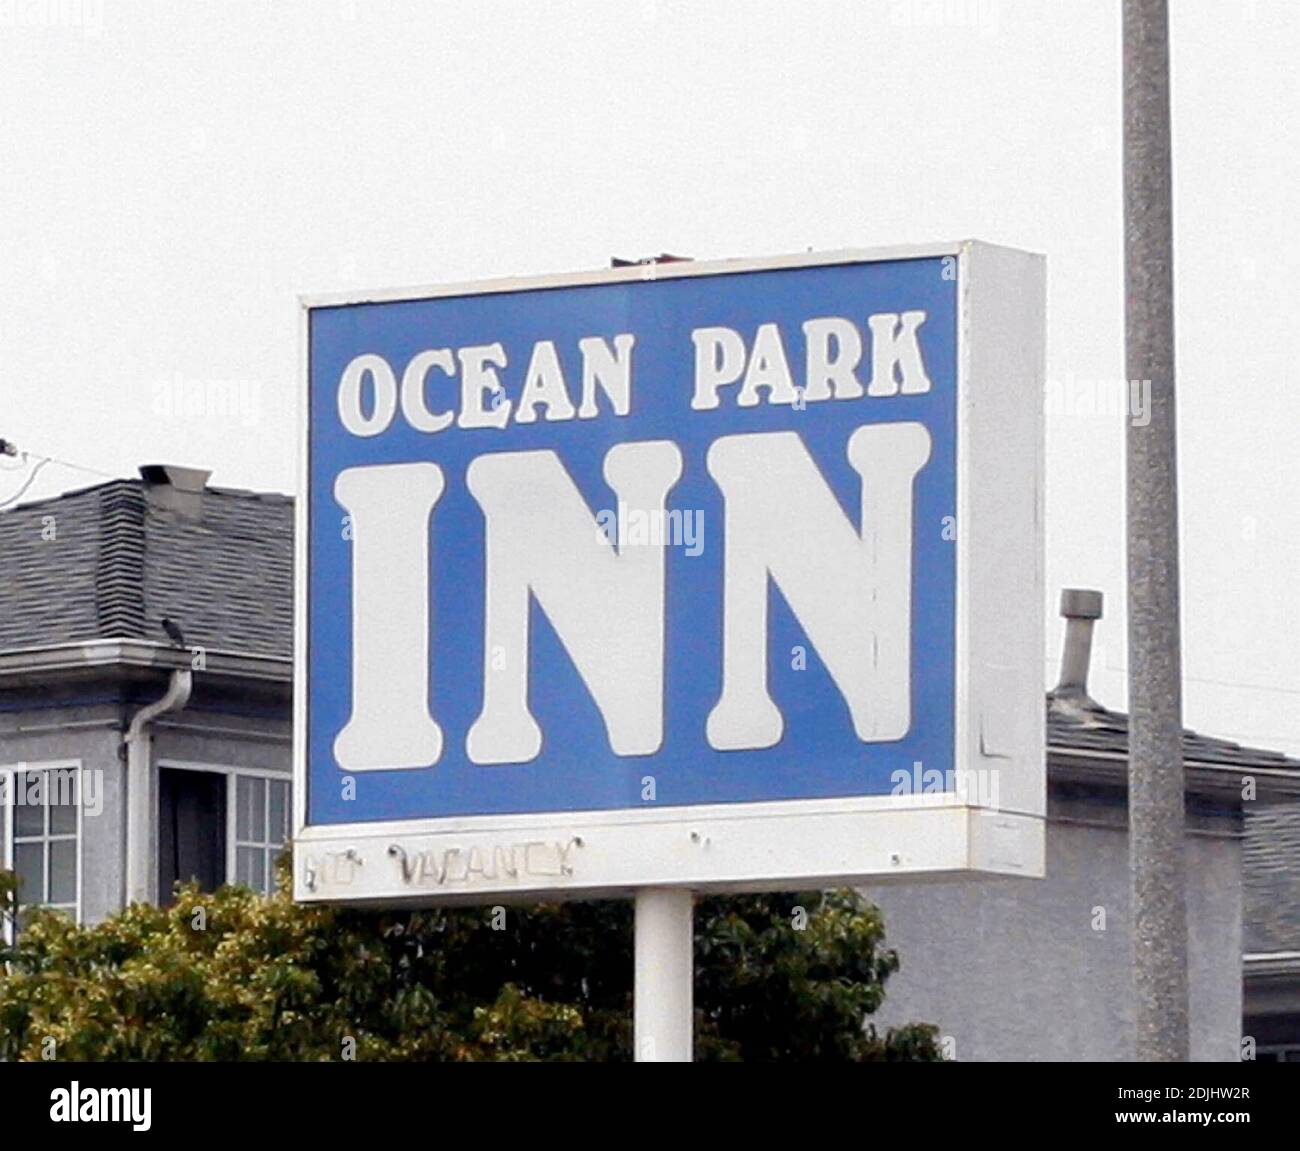 The Ocean Park Inn in Santa Monica, Ca. where Daniel Baldwin was arrested on April 22nd for investigation of cocaine possession. The actor will not face felony charges according to authorities. After reviewing the case, the Los Angeles County district attorney's office referred the matter to the city attorney's office in Santa Monica for consideration of misdemeanor charges following the arrest during which a small amount of cocaine and drug paraphernalia were found in the motel room. 4/29/06 Stock Photo